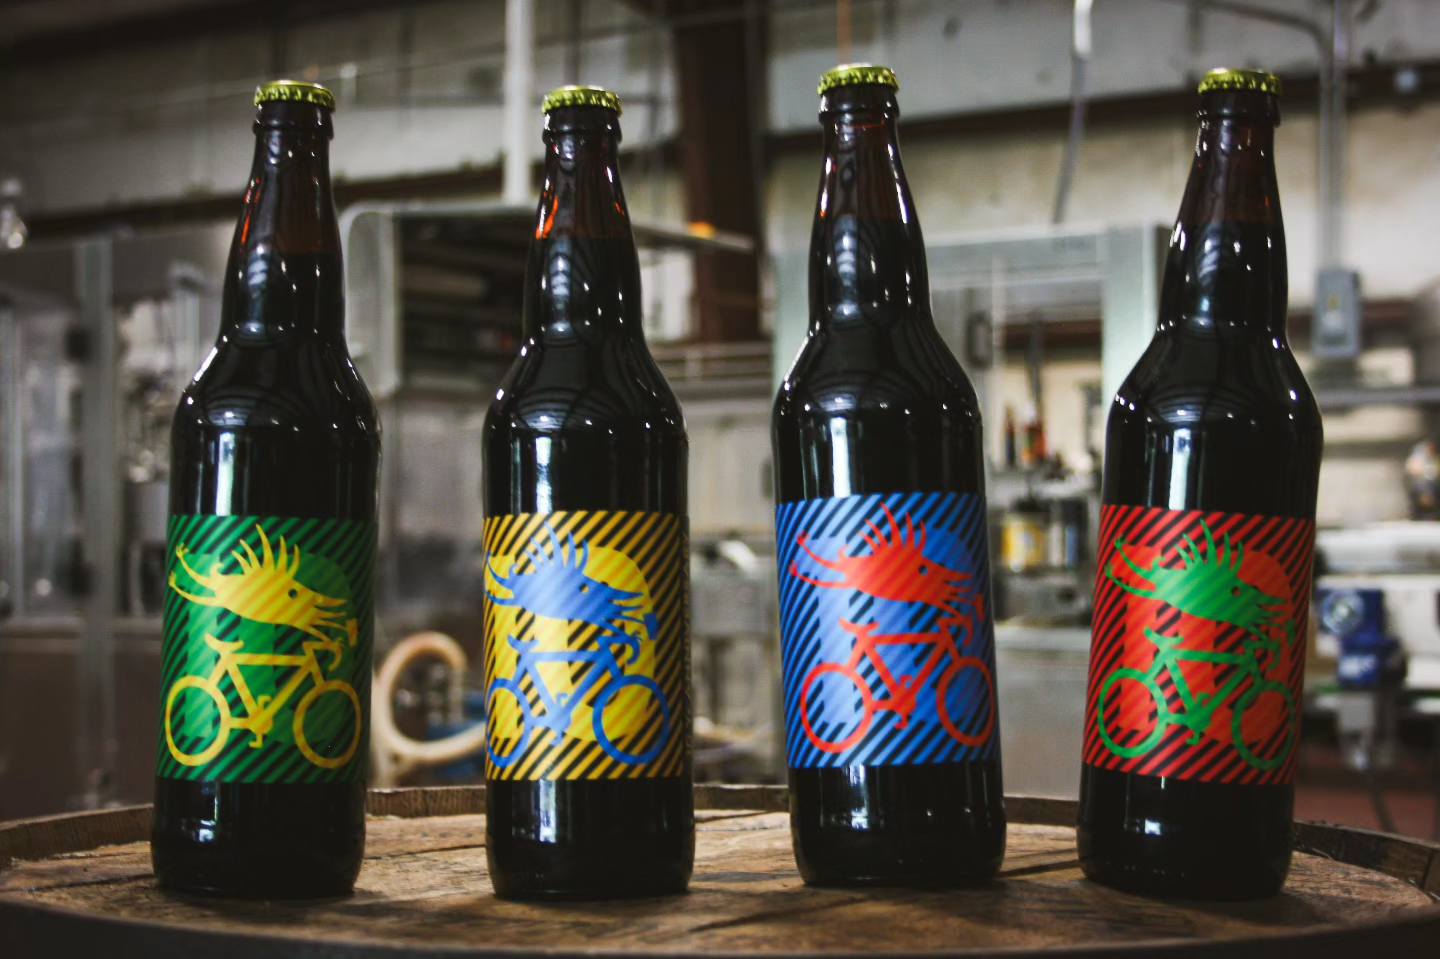 Cycle Brewing's 10th Anniversary Bottle Releases